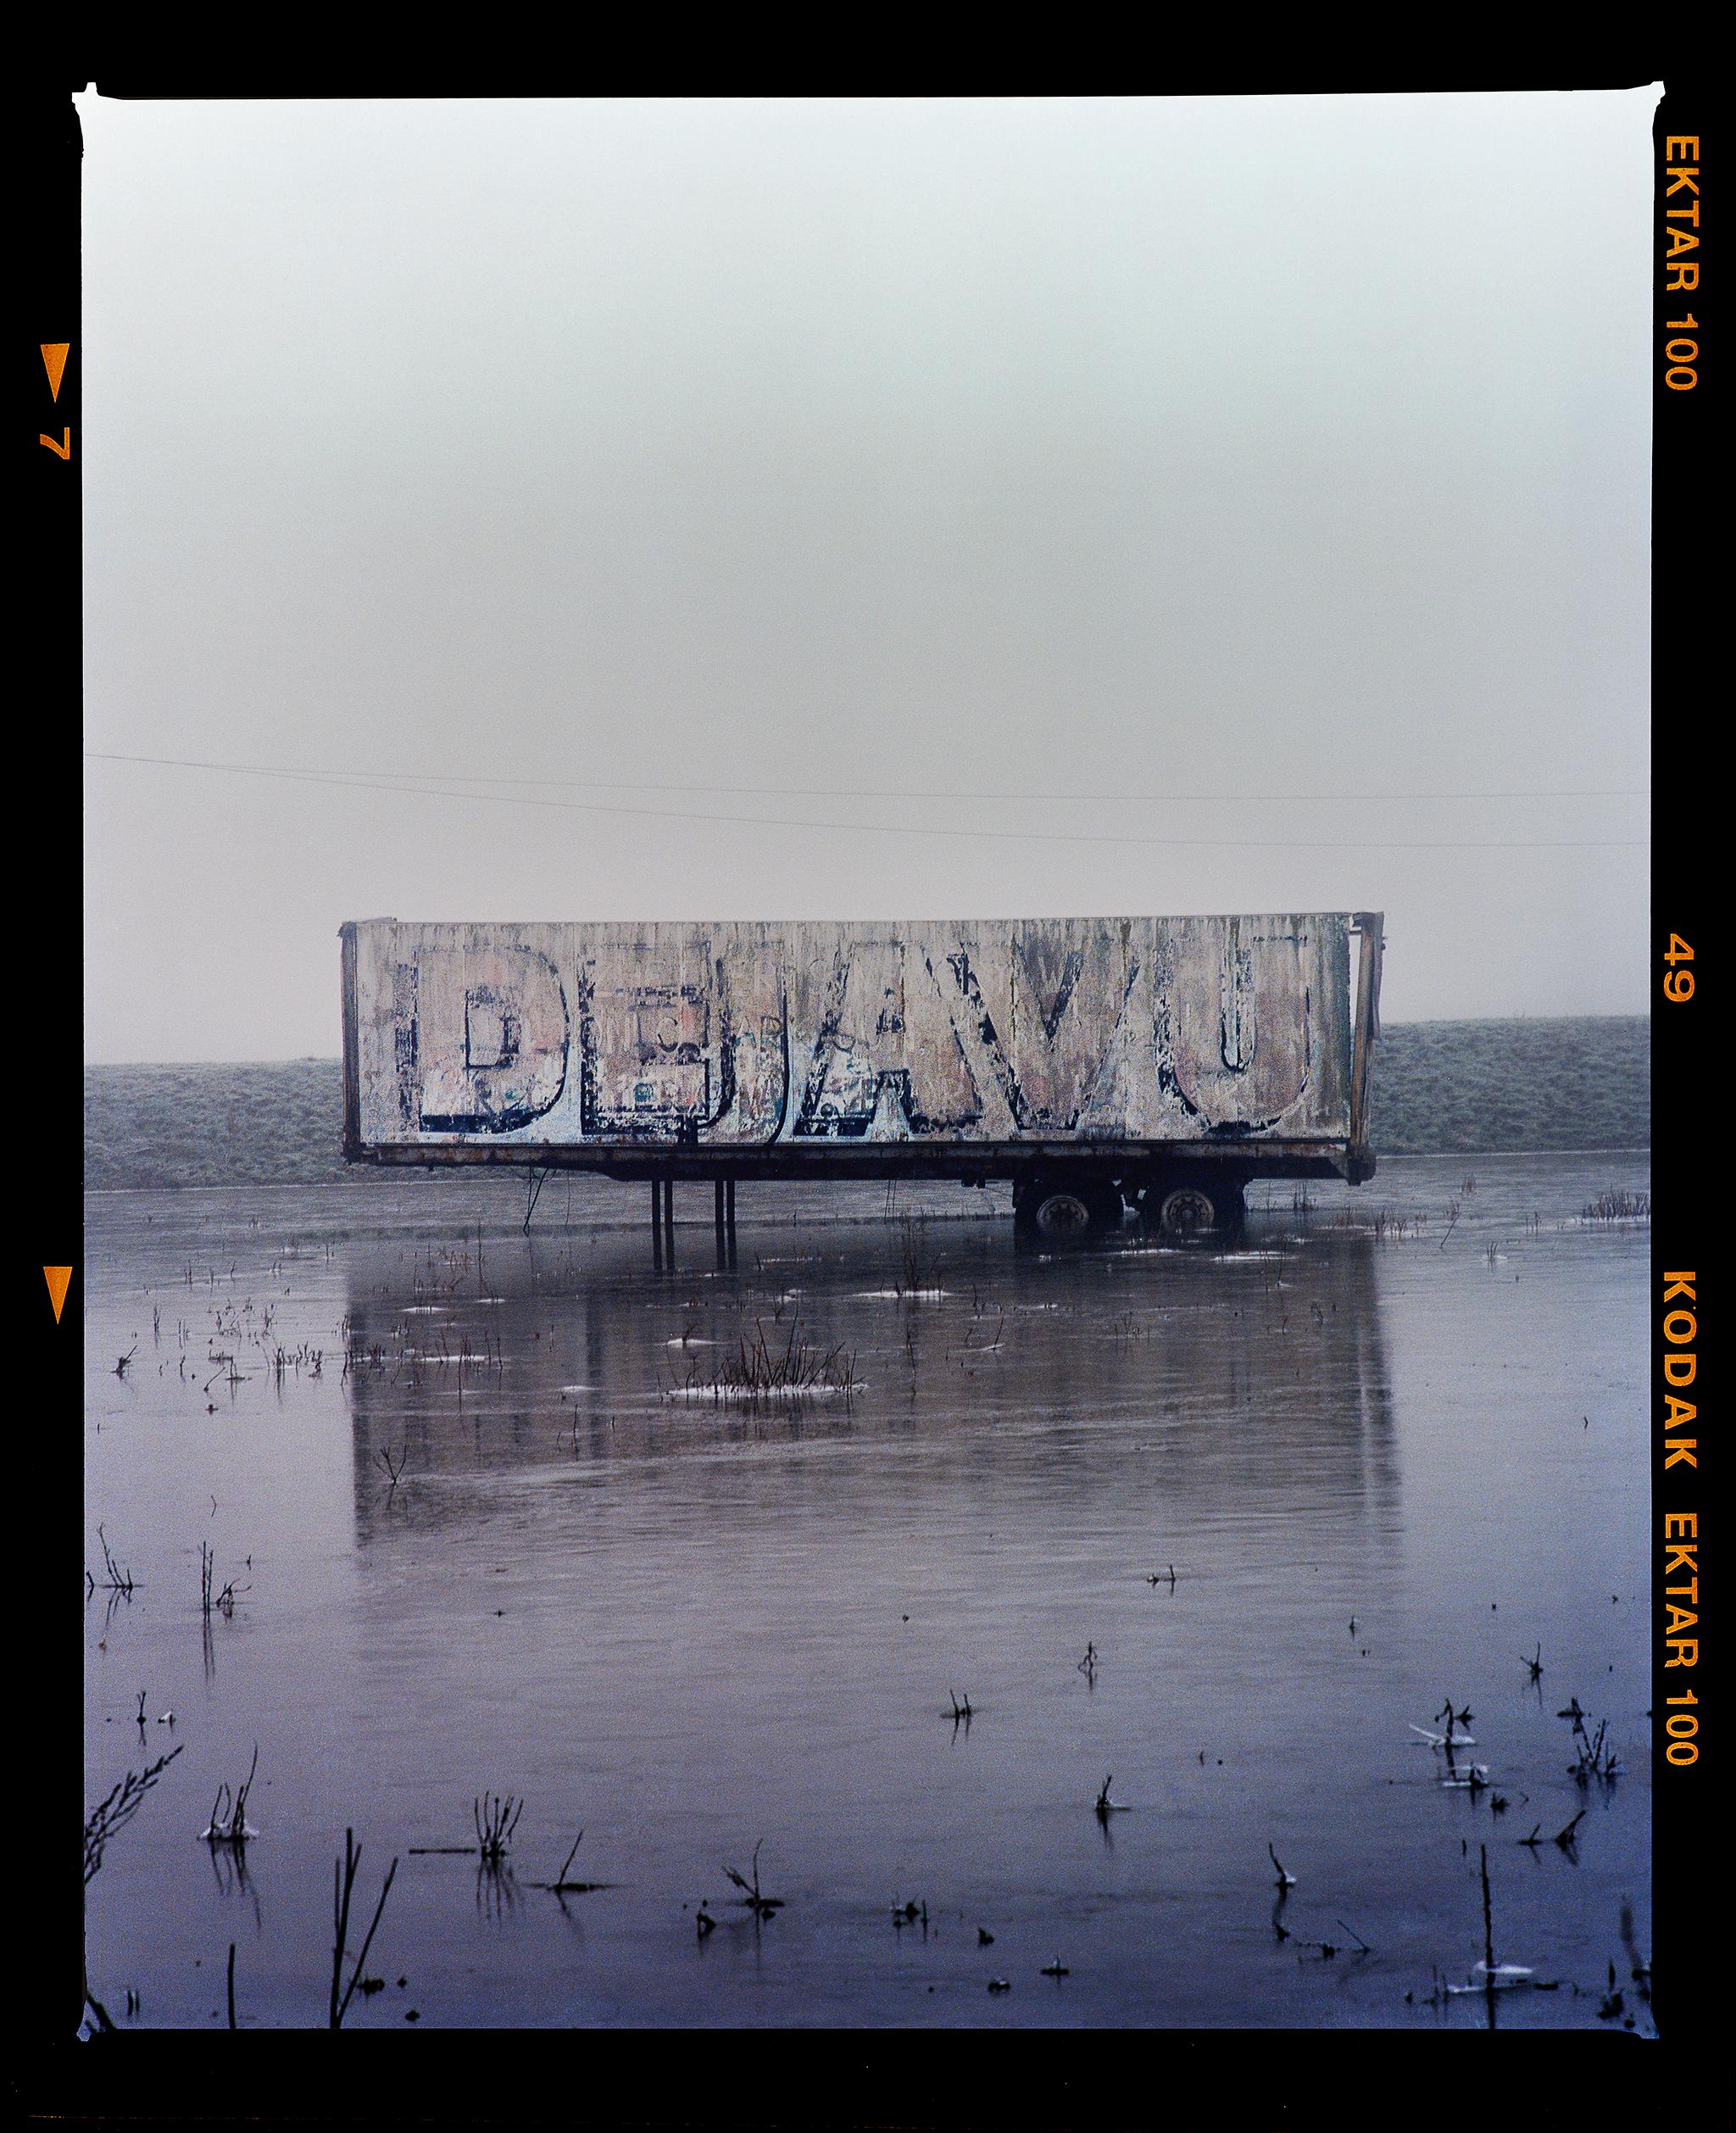 DEJAVU Trailer, captured on a frosty winter morning, on one of Richard's many visits, capturing the trailer in the fen landscape as it changes with the seasons.

This artwork is a limited edition of 25, gloss photographic print, dry-mounted to